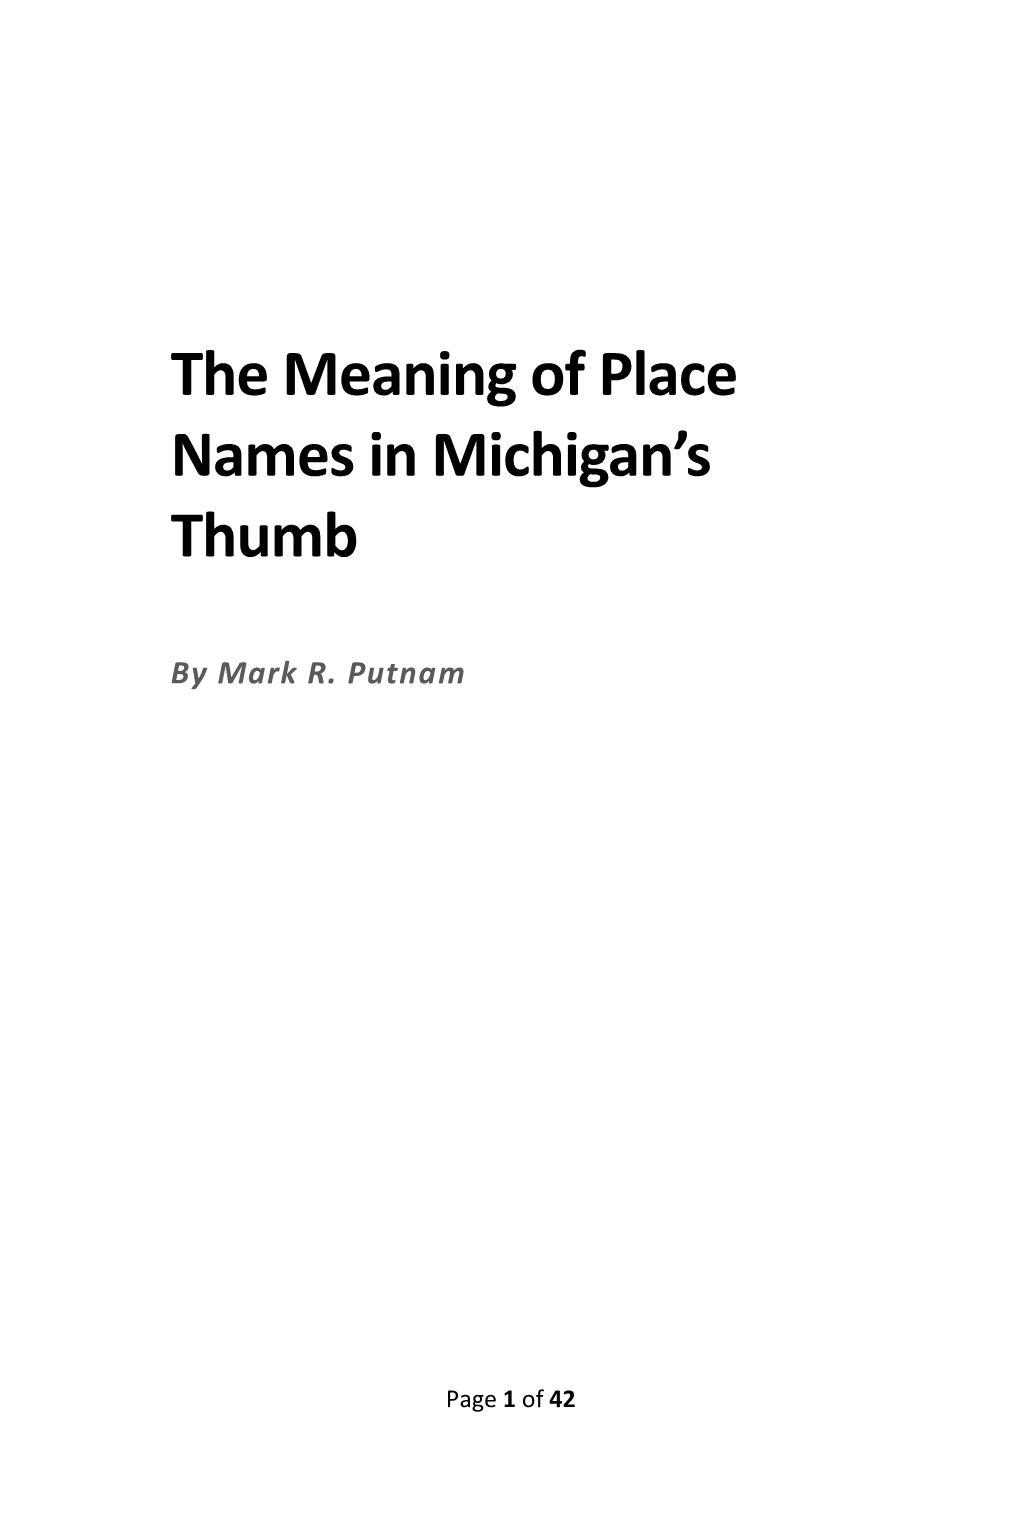 The Meaning of Place Names in Michigan's Thumb